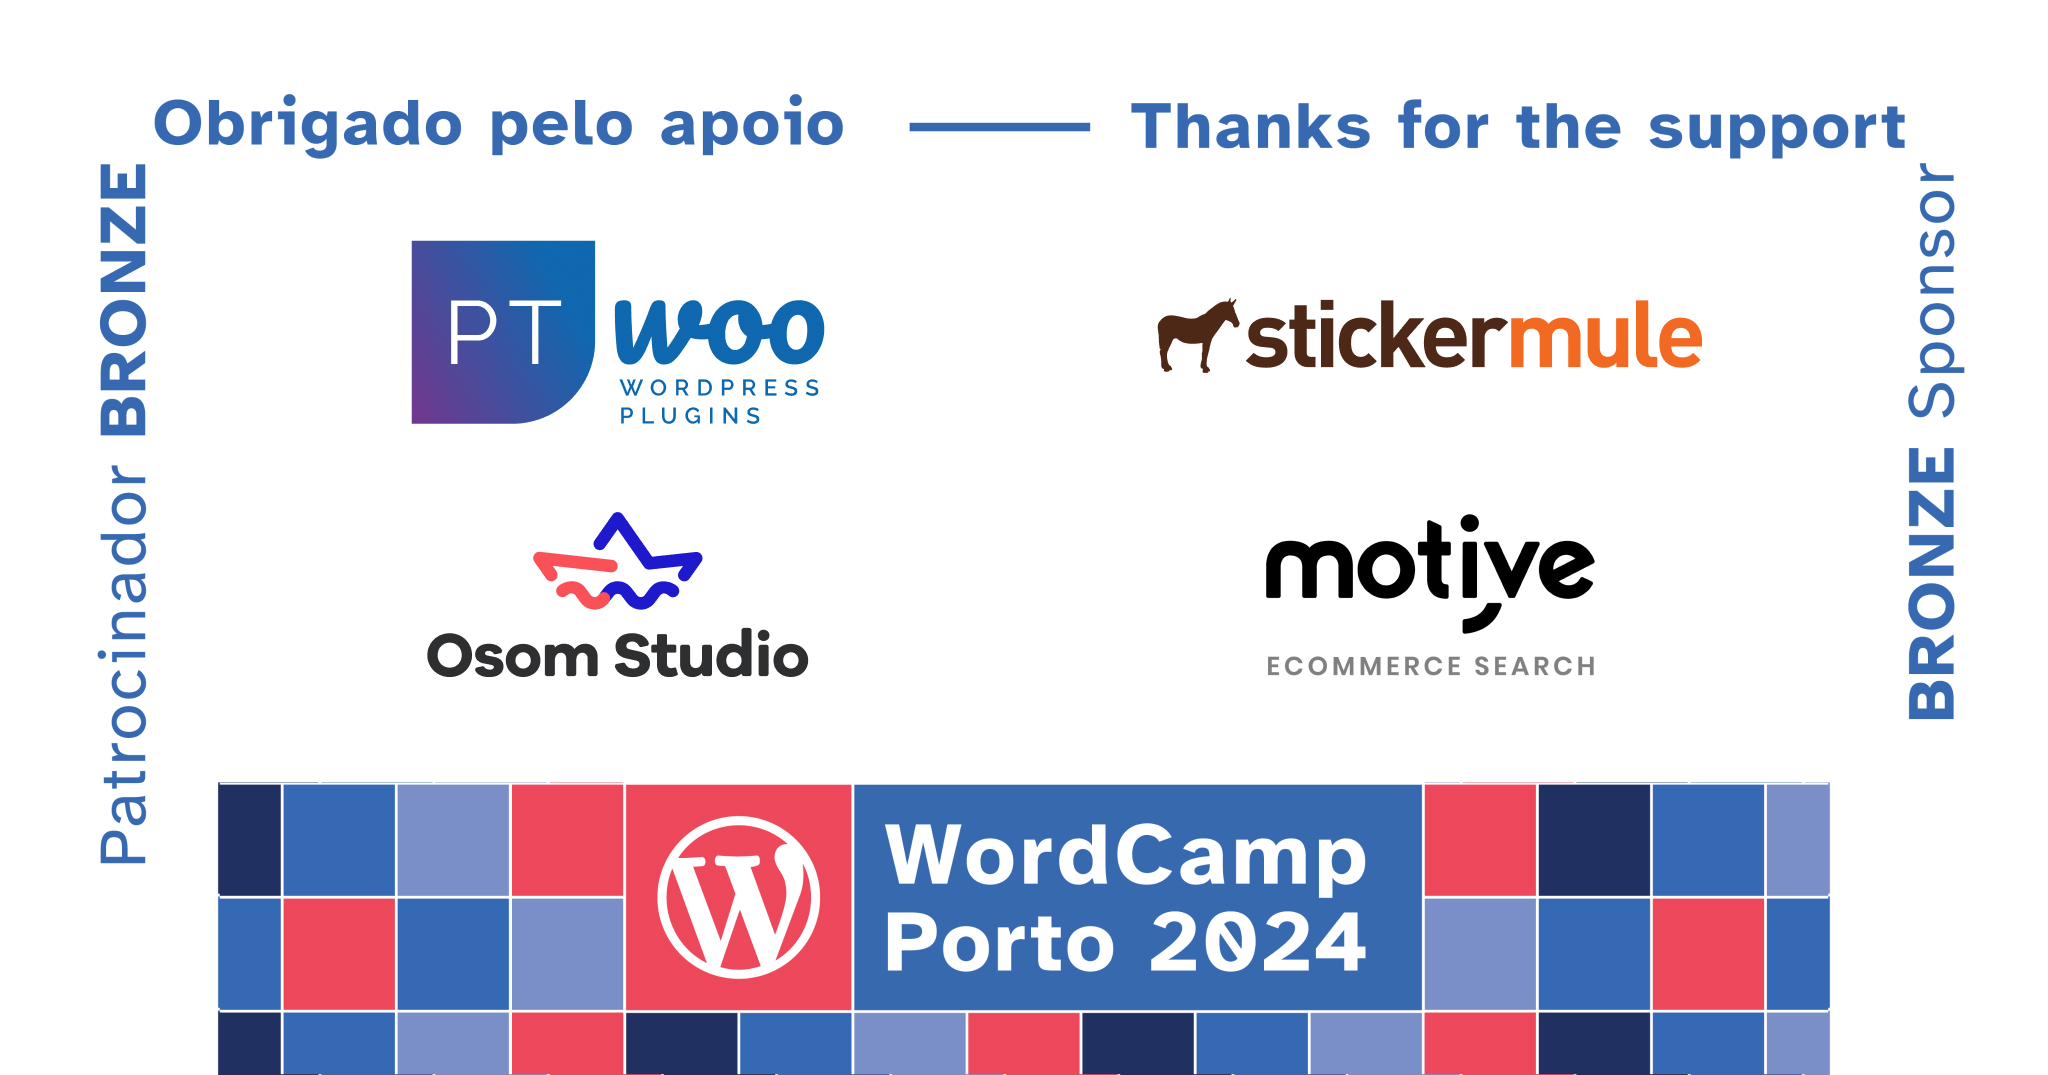 Thank you Pt Woo Plugins, Stickermule, Osom Studio and Motive Shop Search